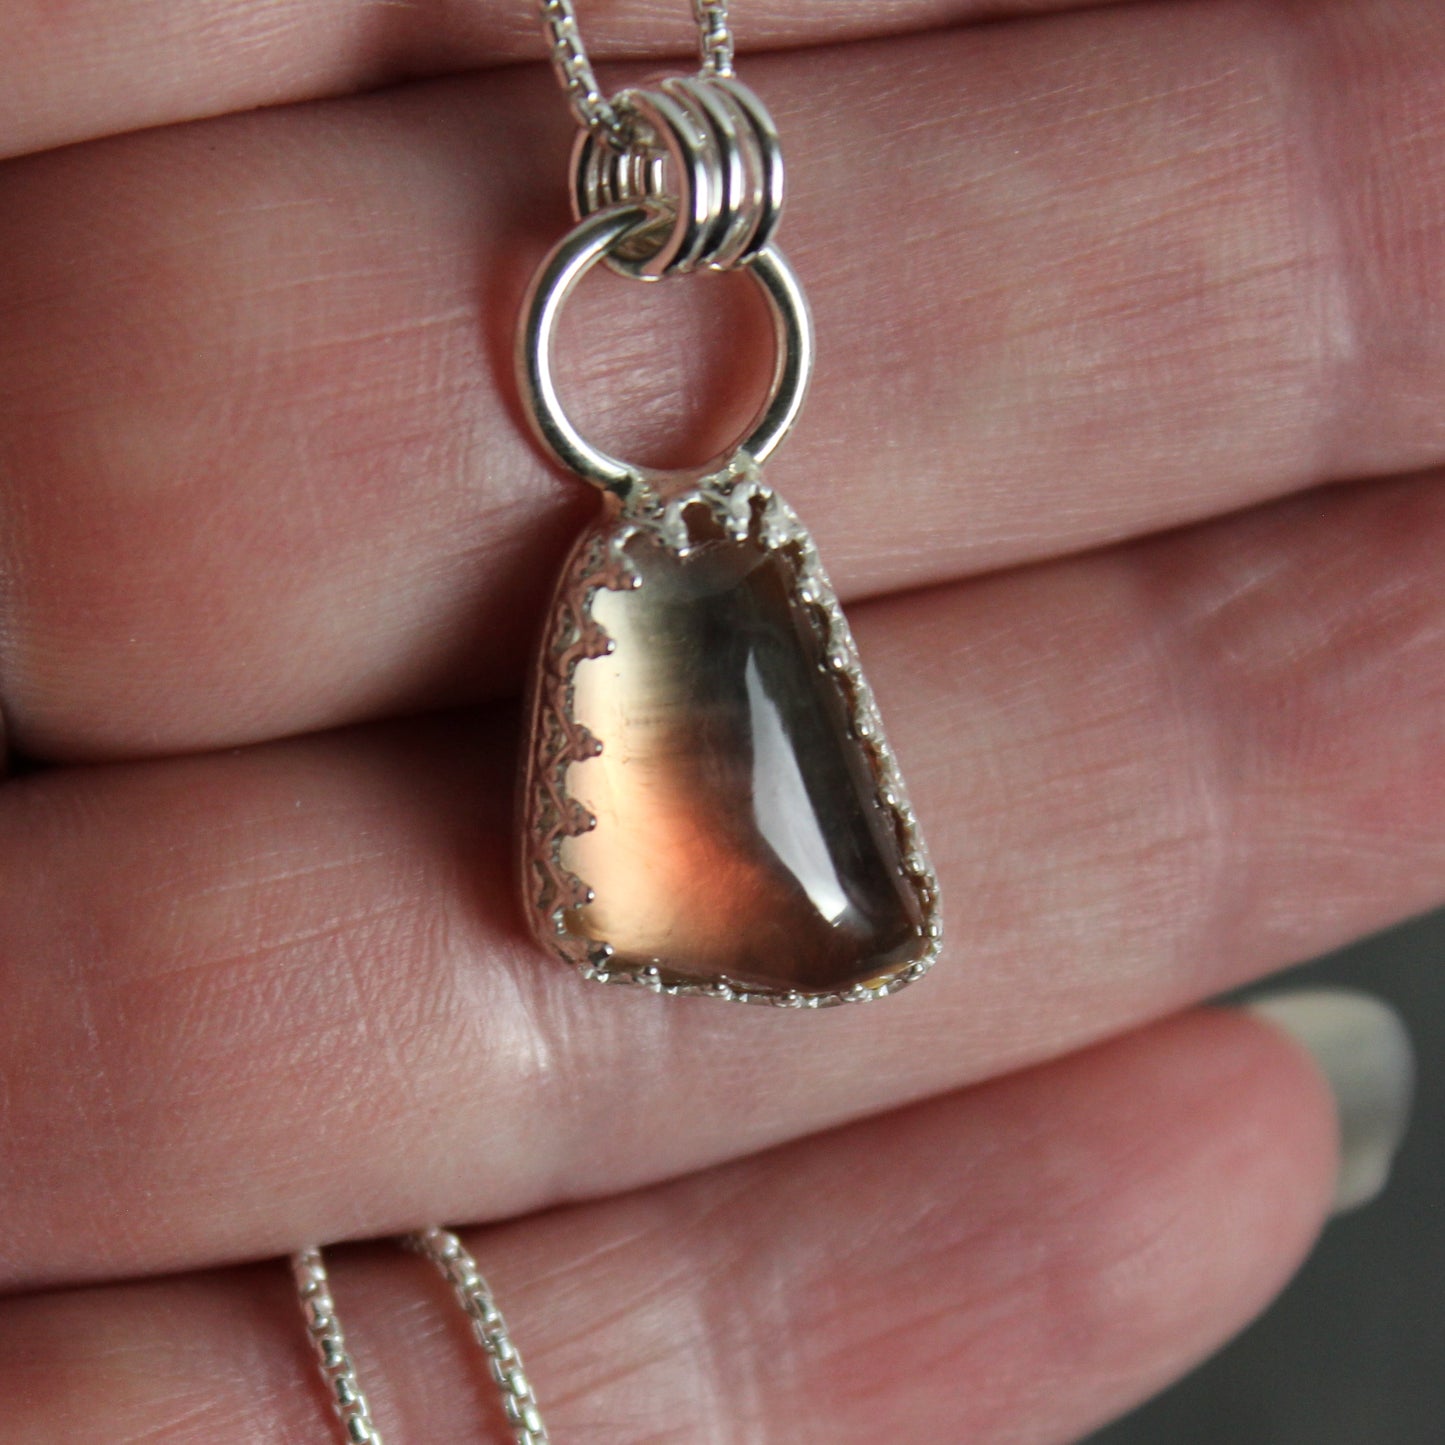 This is an approximately 12mm x 18mm Oregon sunstone with red and shiller throughout.  It has a fancy sterling silver bezel setting. 